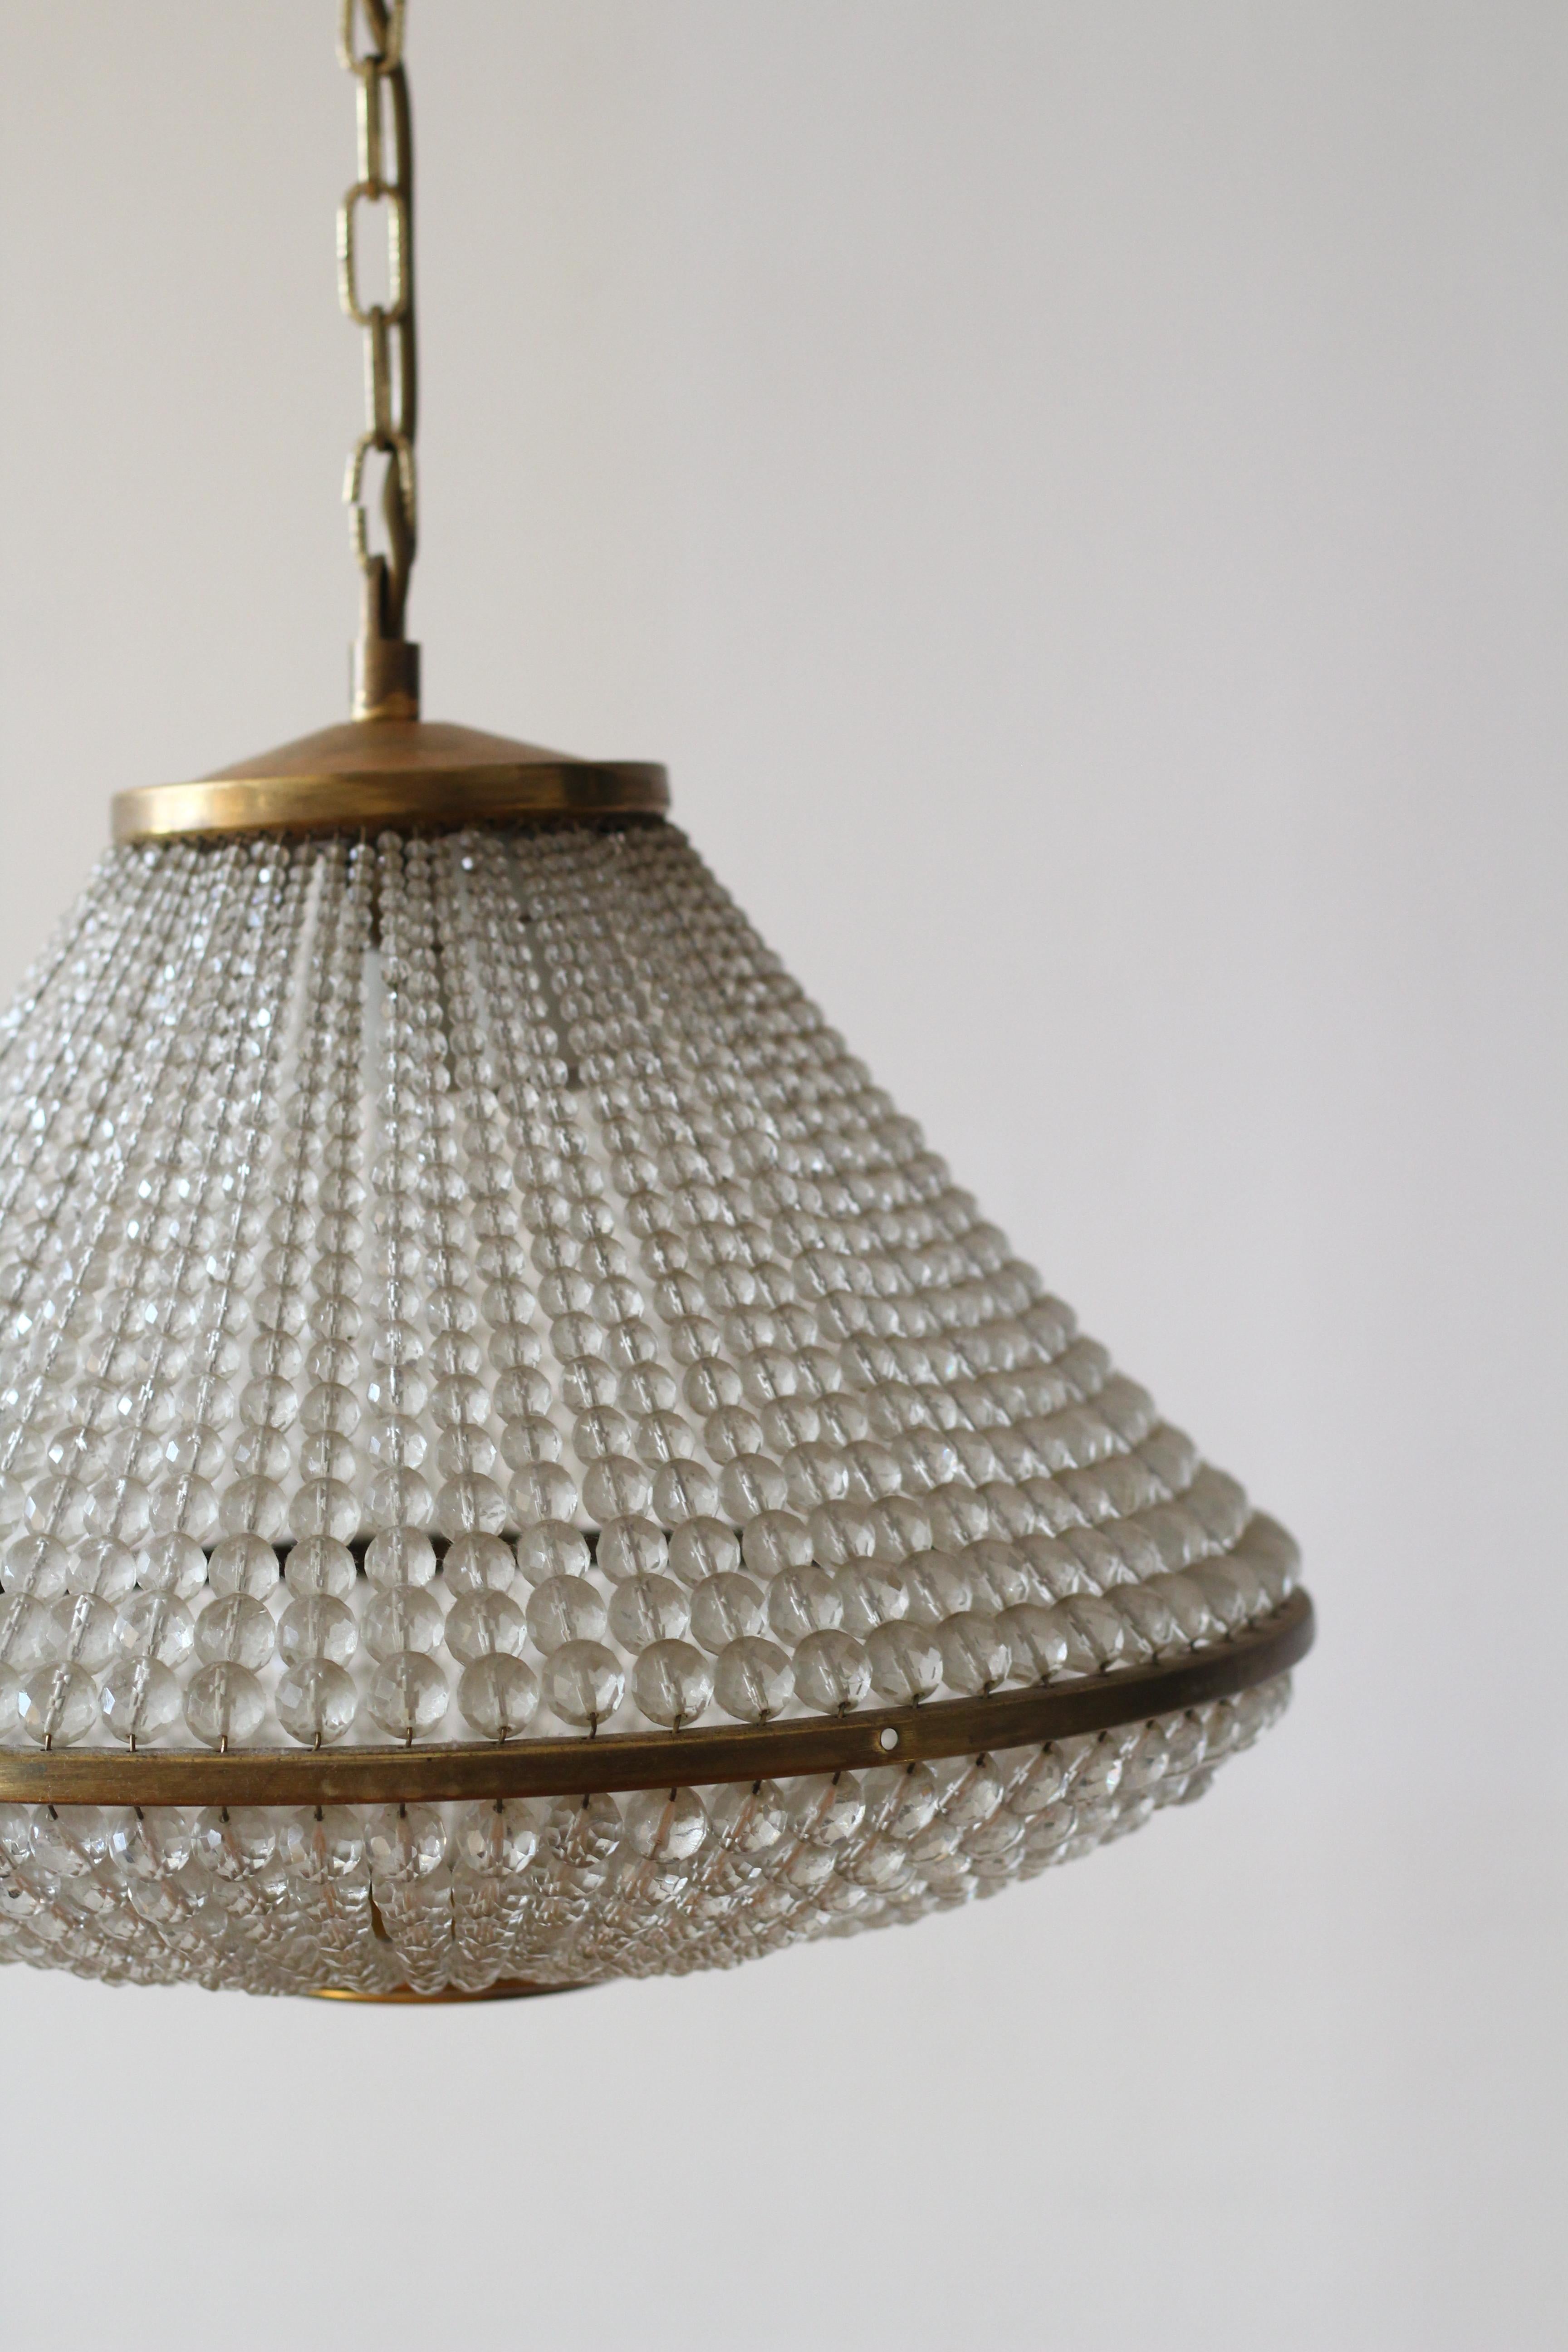 Austrian Brass and Lucite Pearls Chandelier 1950s For Sale 1